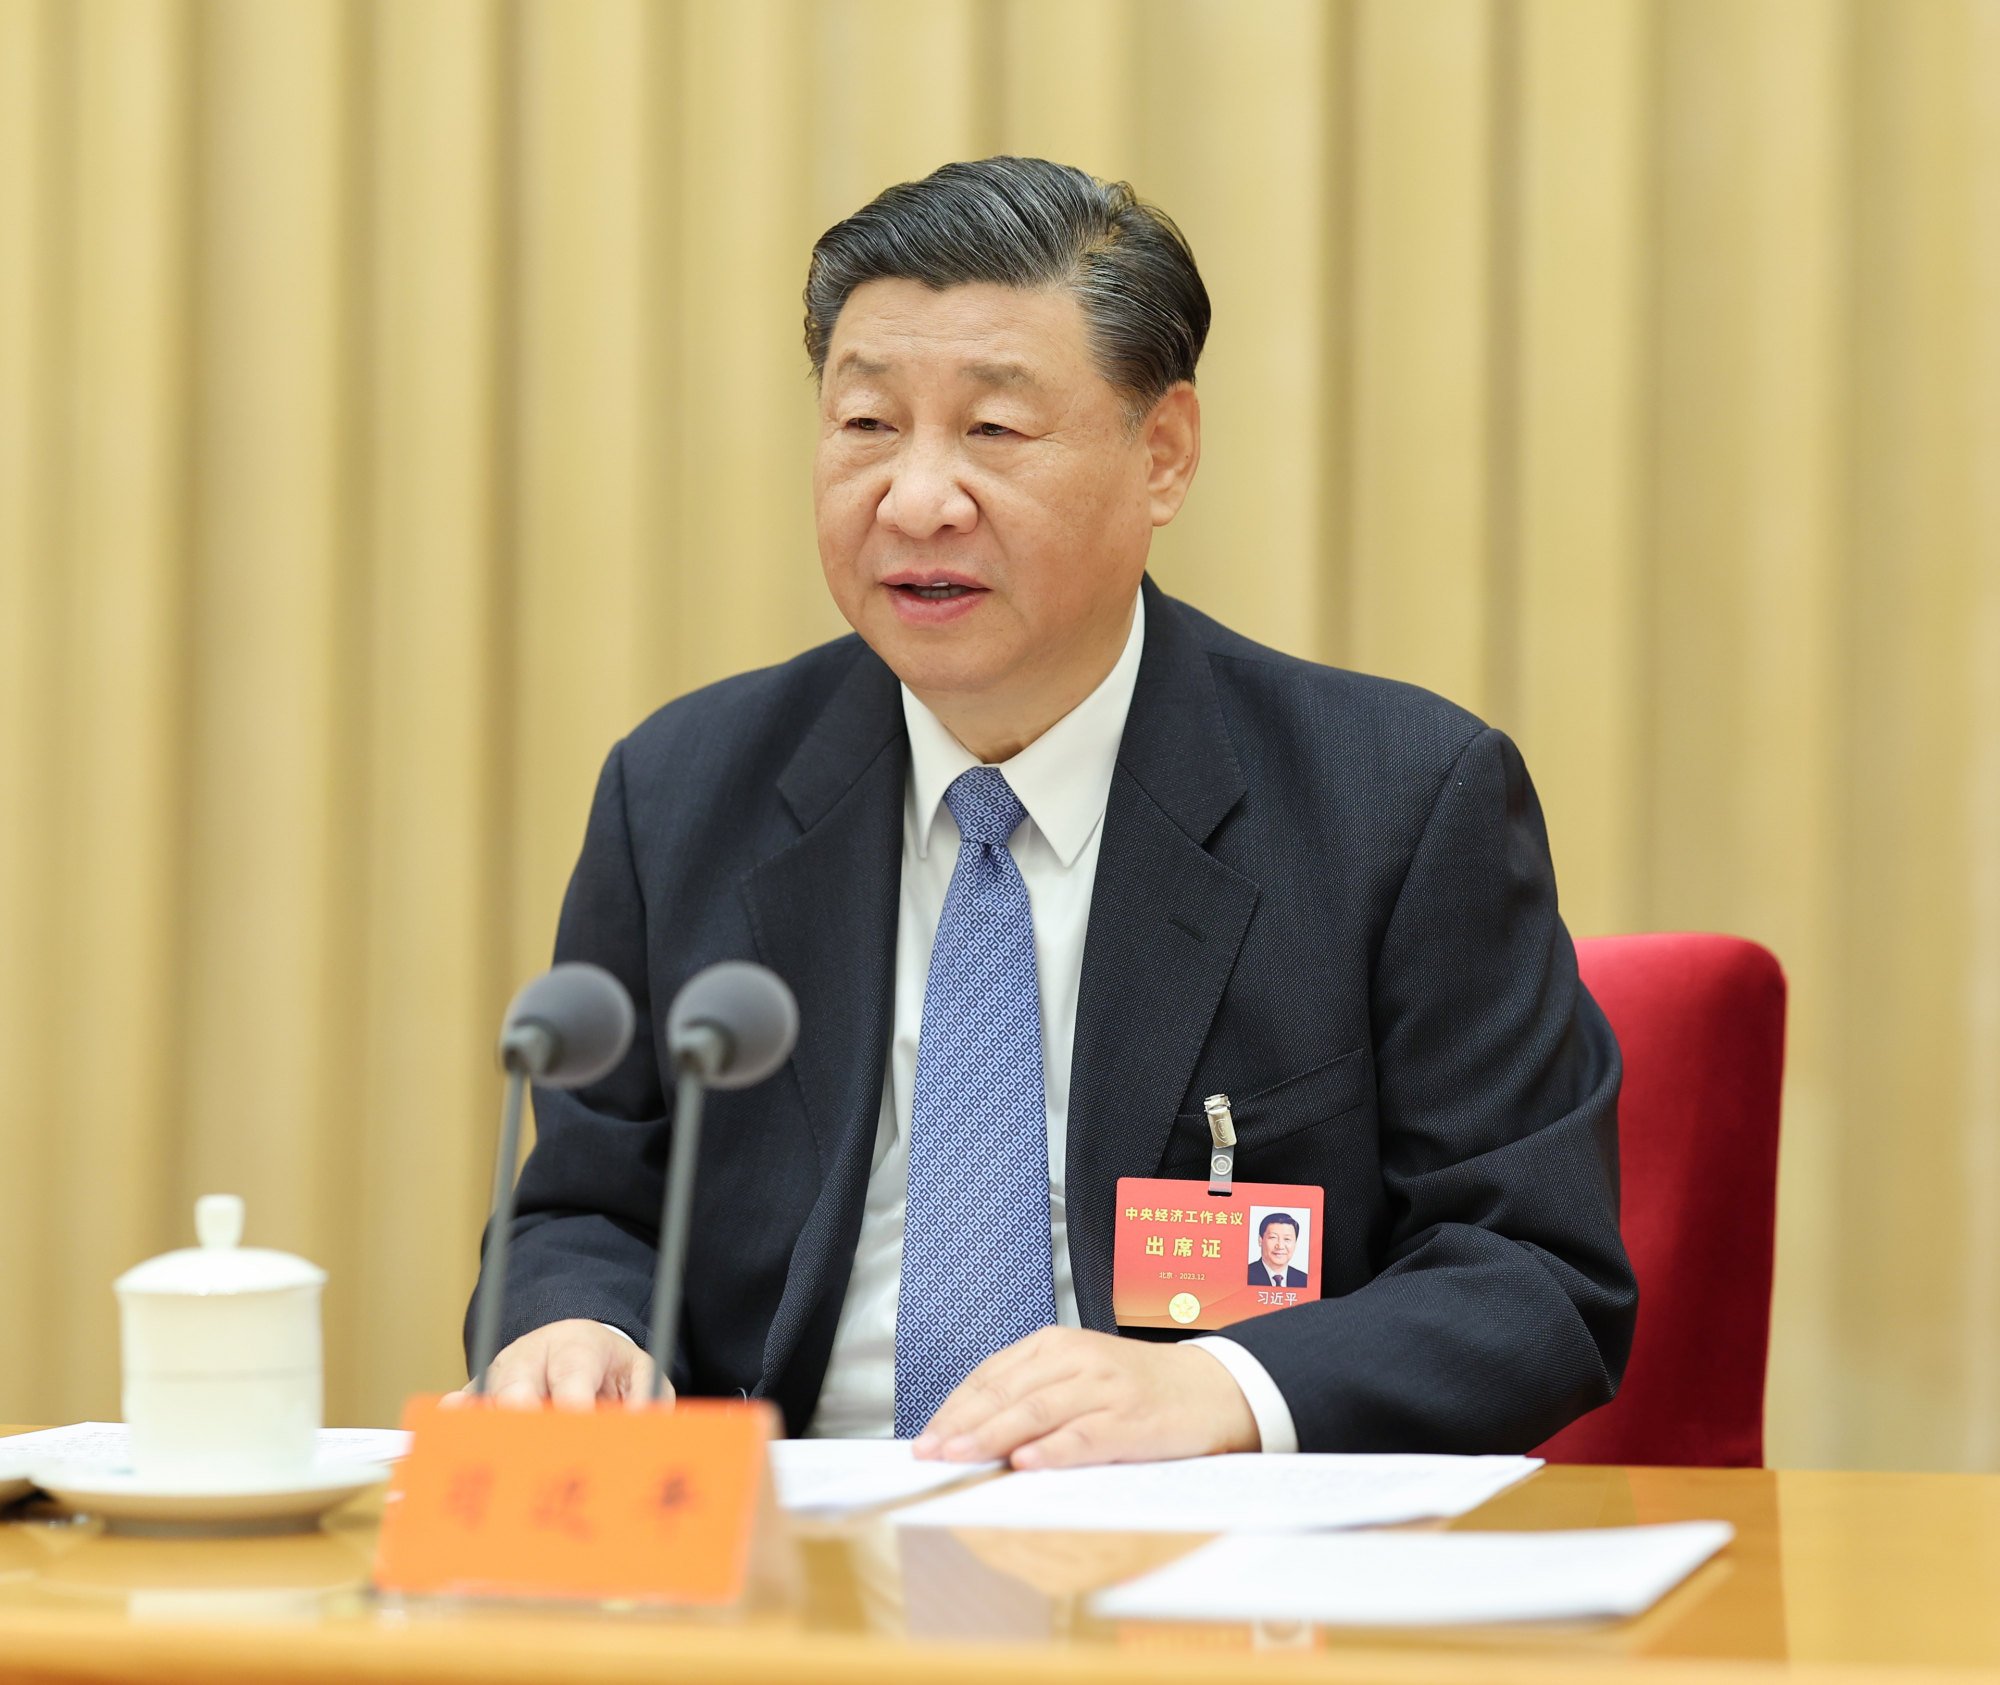 Chinese President Xi Jinping addresses the annual central economic work conference in Beijing on Dec. 12. Xinhua-Yonhap